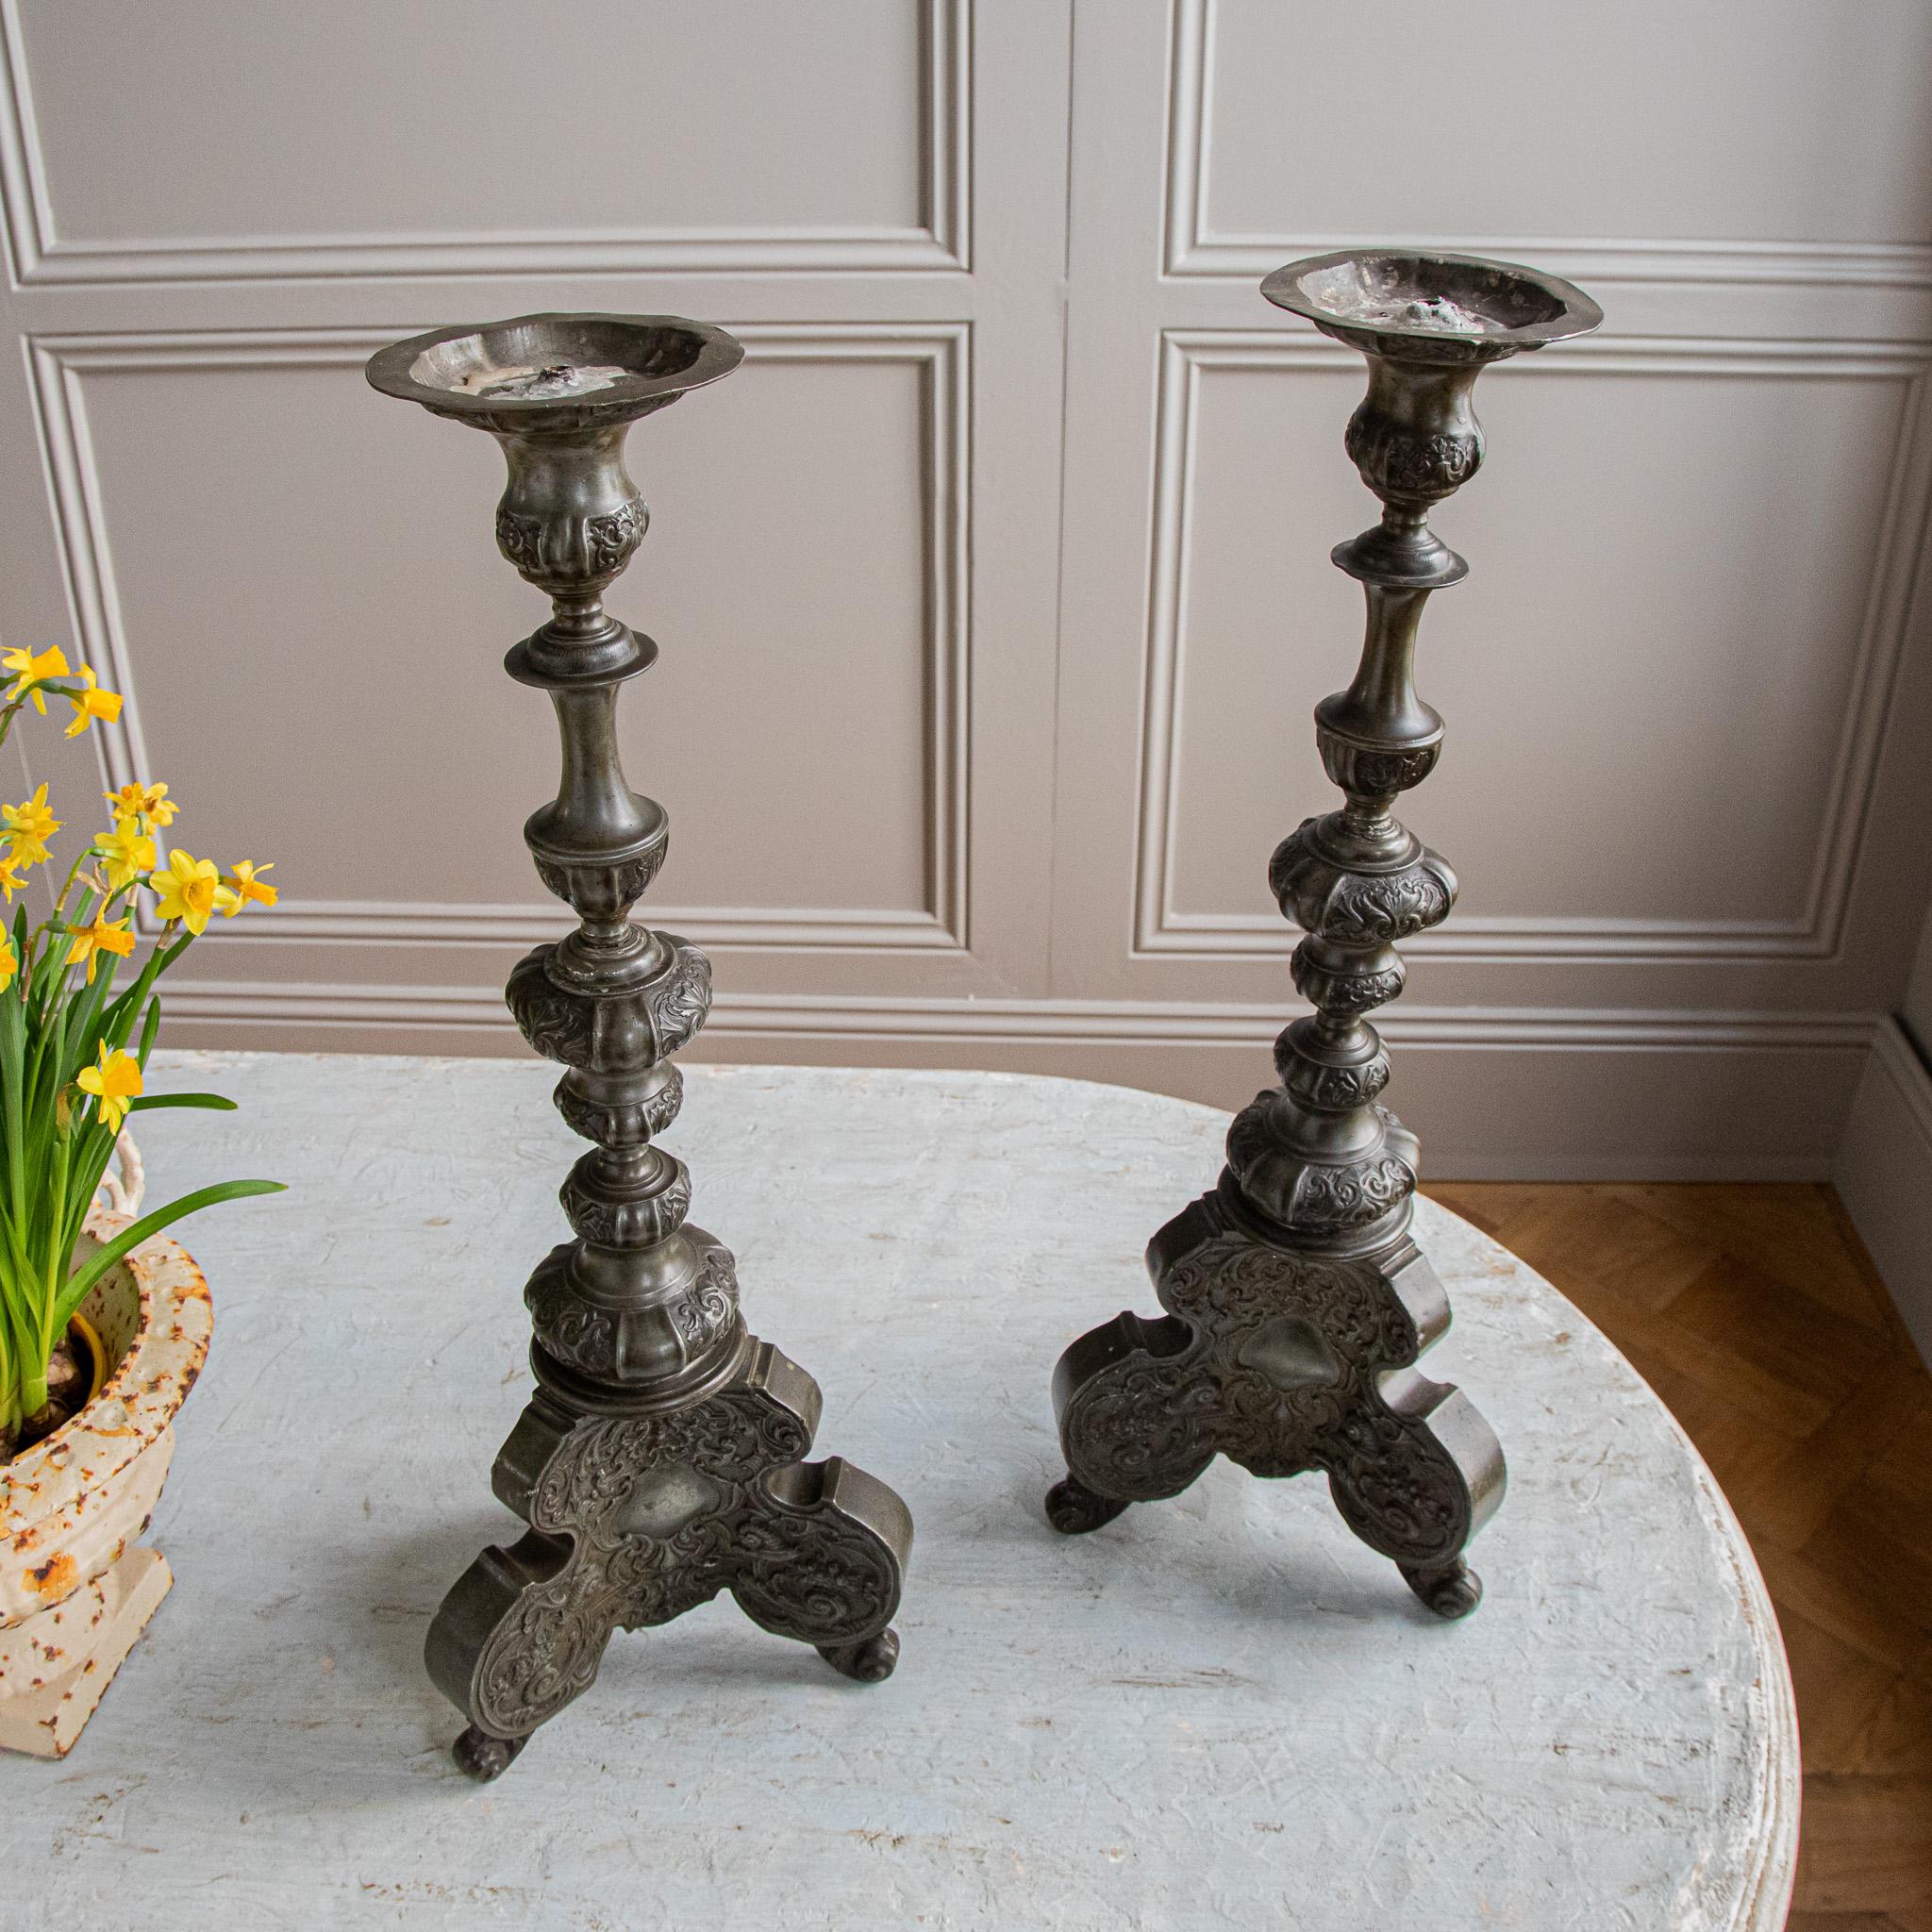 19th Century Renaissance Style Pewter Candle Holders From Towie Barclay Castle For Sale 4